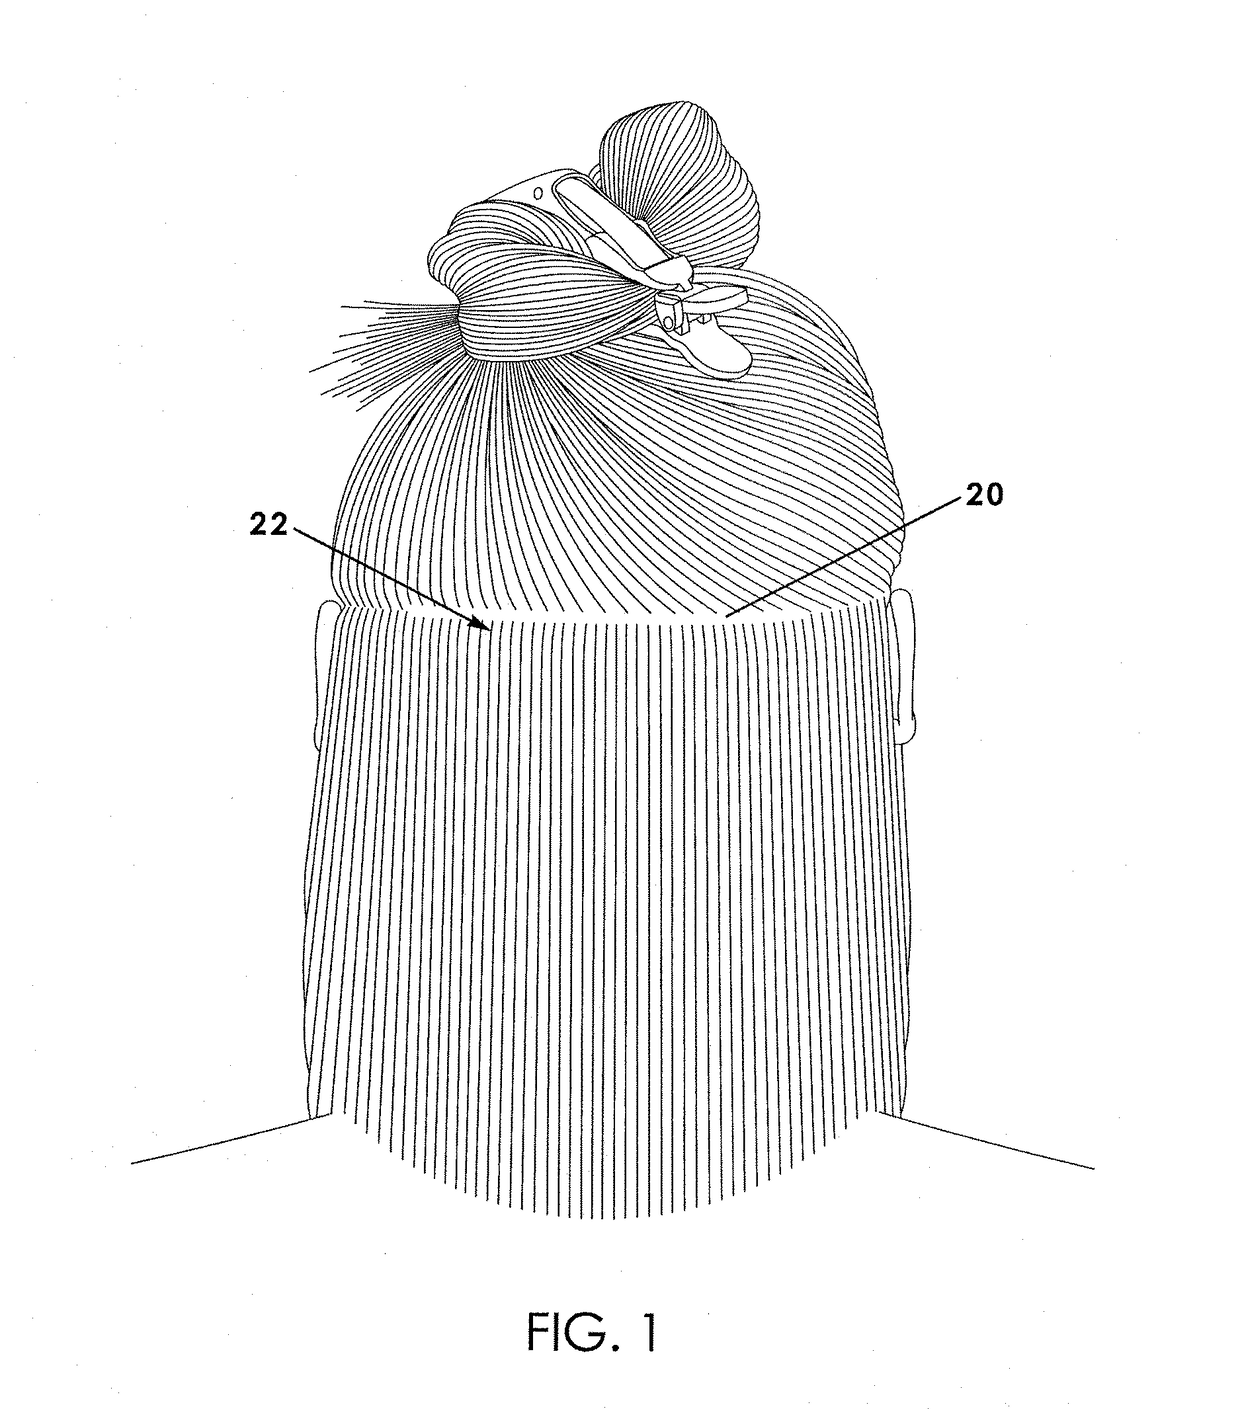 Braidless apparatus and method of combining natural and artificial hair